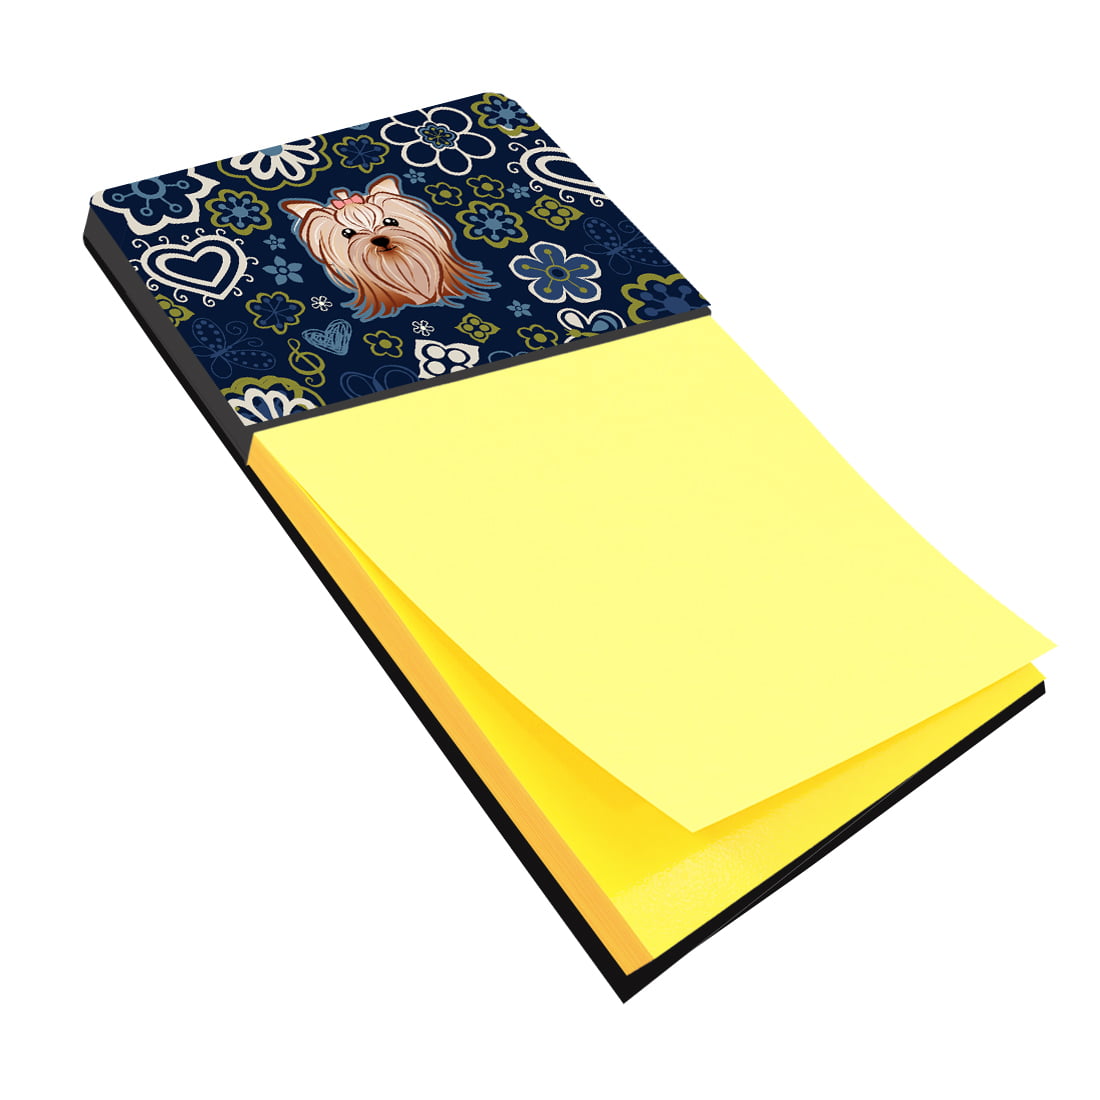 Bb5055sn Blue Flowers Yorkie Yorkishire Terrier Sticky Note Holder